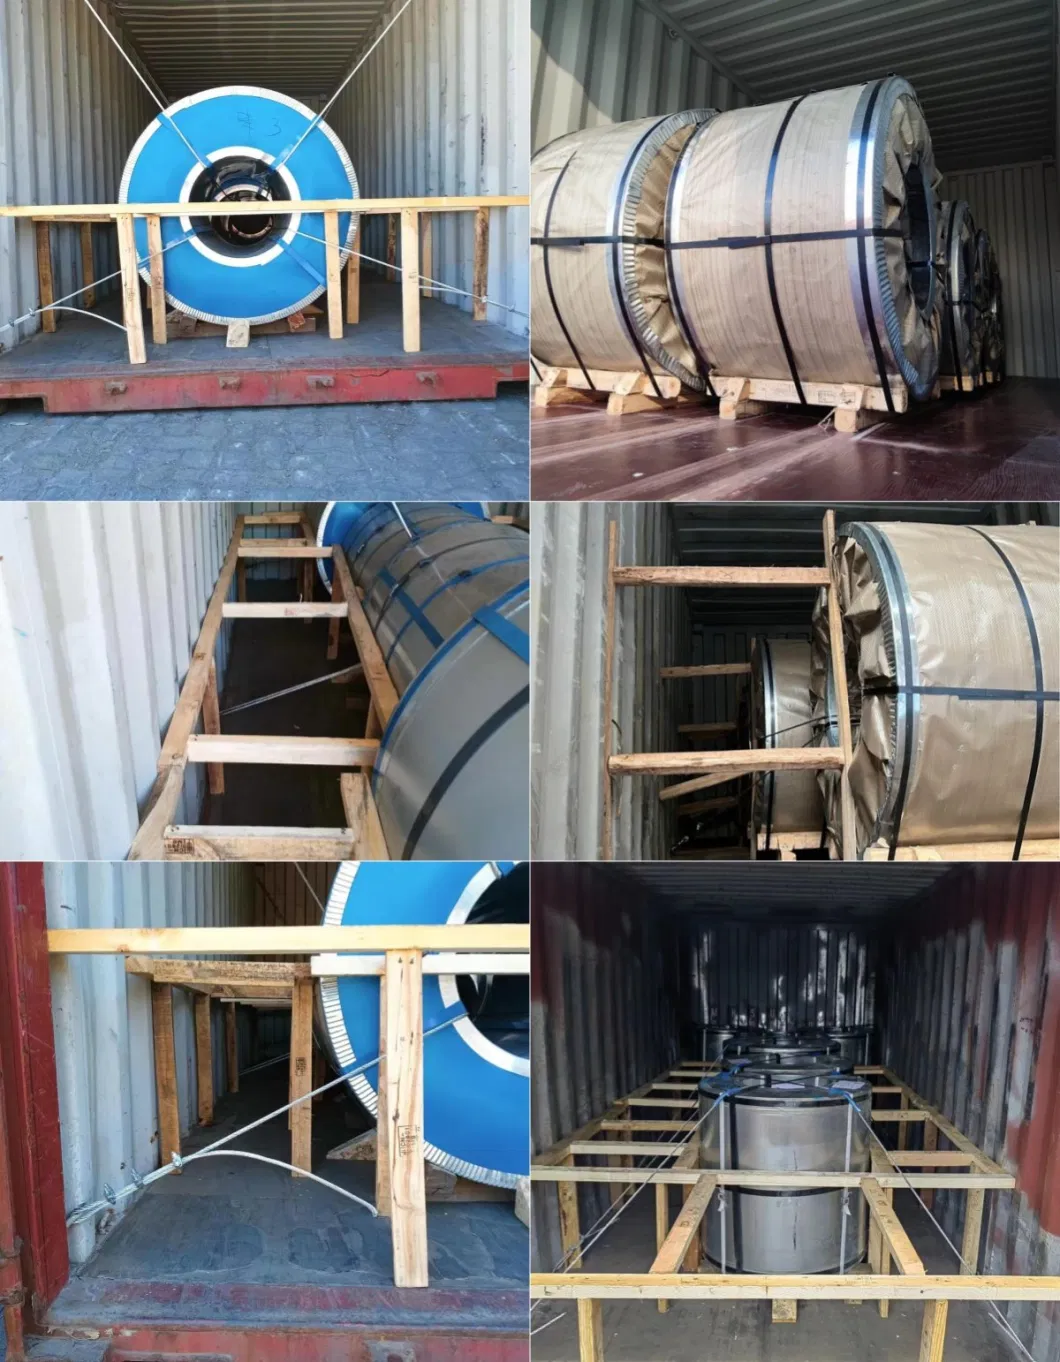 Hot Dipped SGCC, SPCC, Dx51d Prepainted Steel Coil for Building Materials